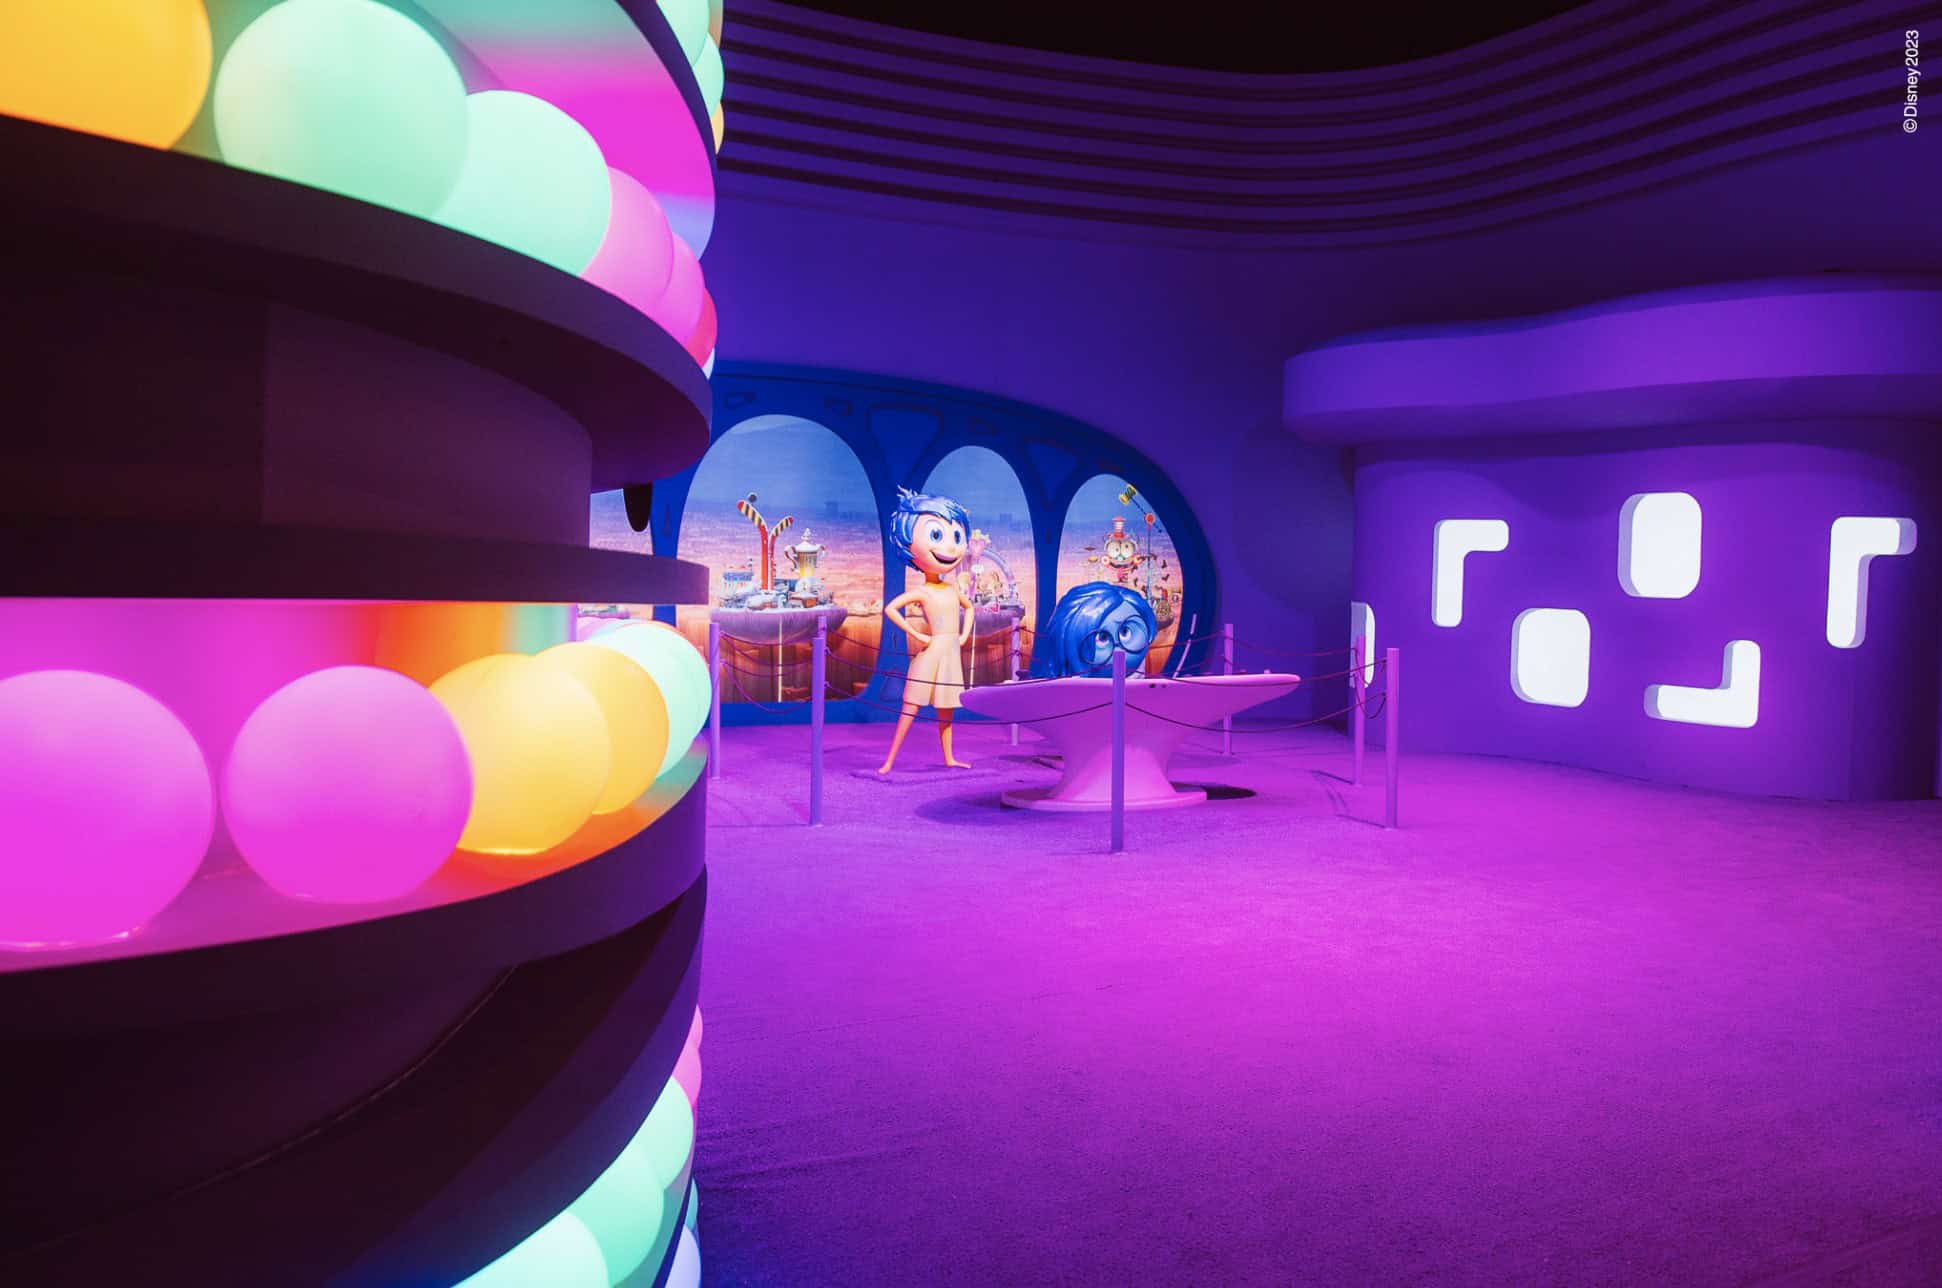 The immersive exhibition 'Pixar World' with its iconic films arrives in Barcelona